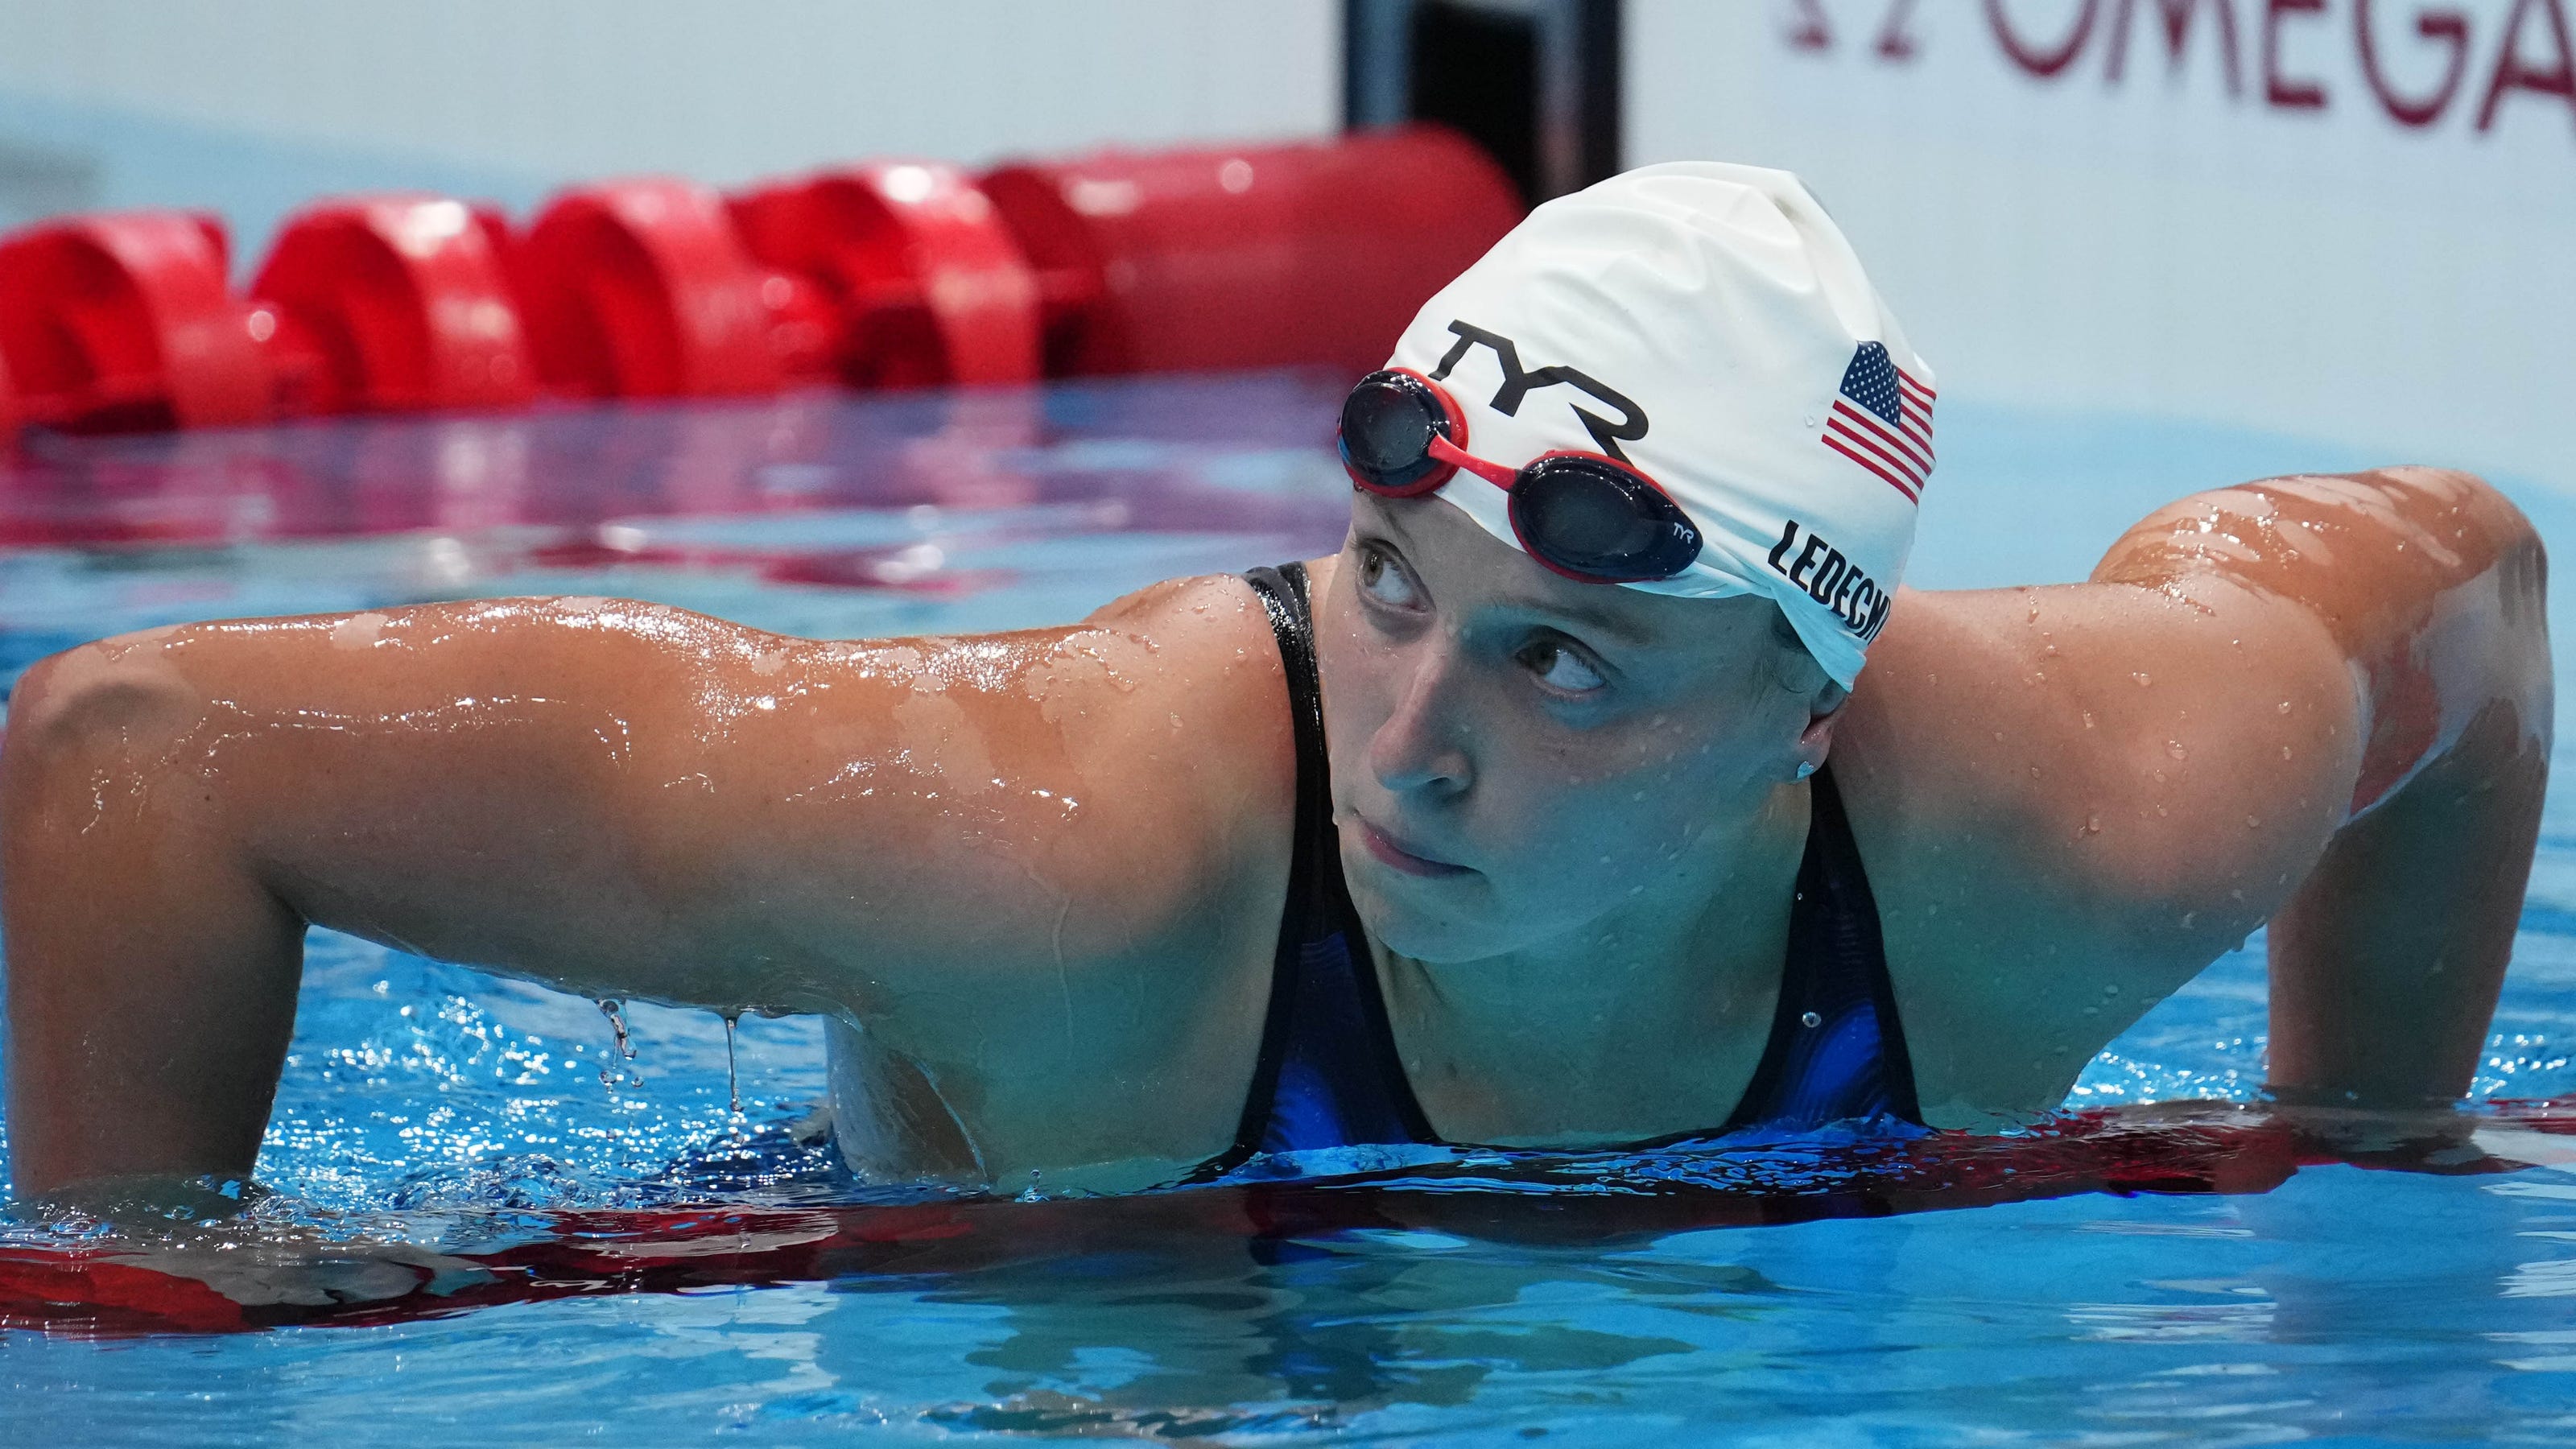 Katie Ledecky swims total of 2,100 meters in marathon Olympic day